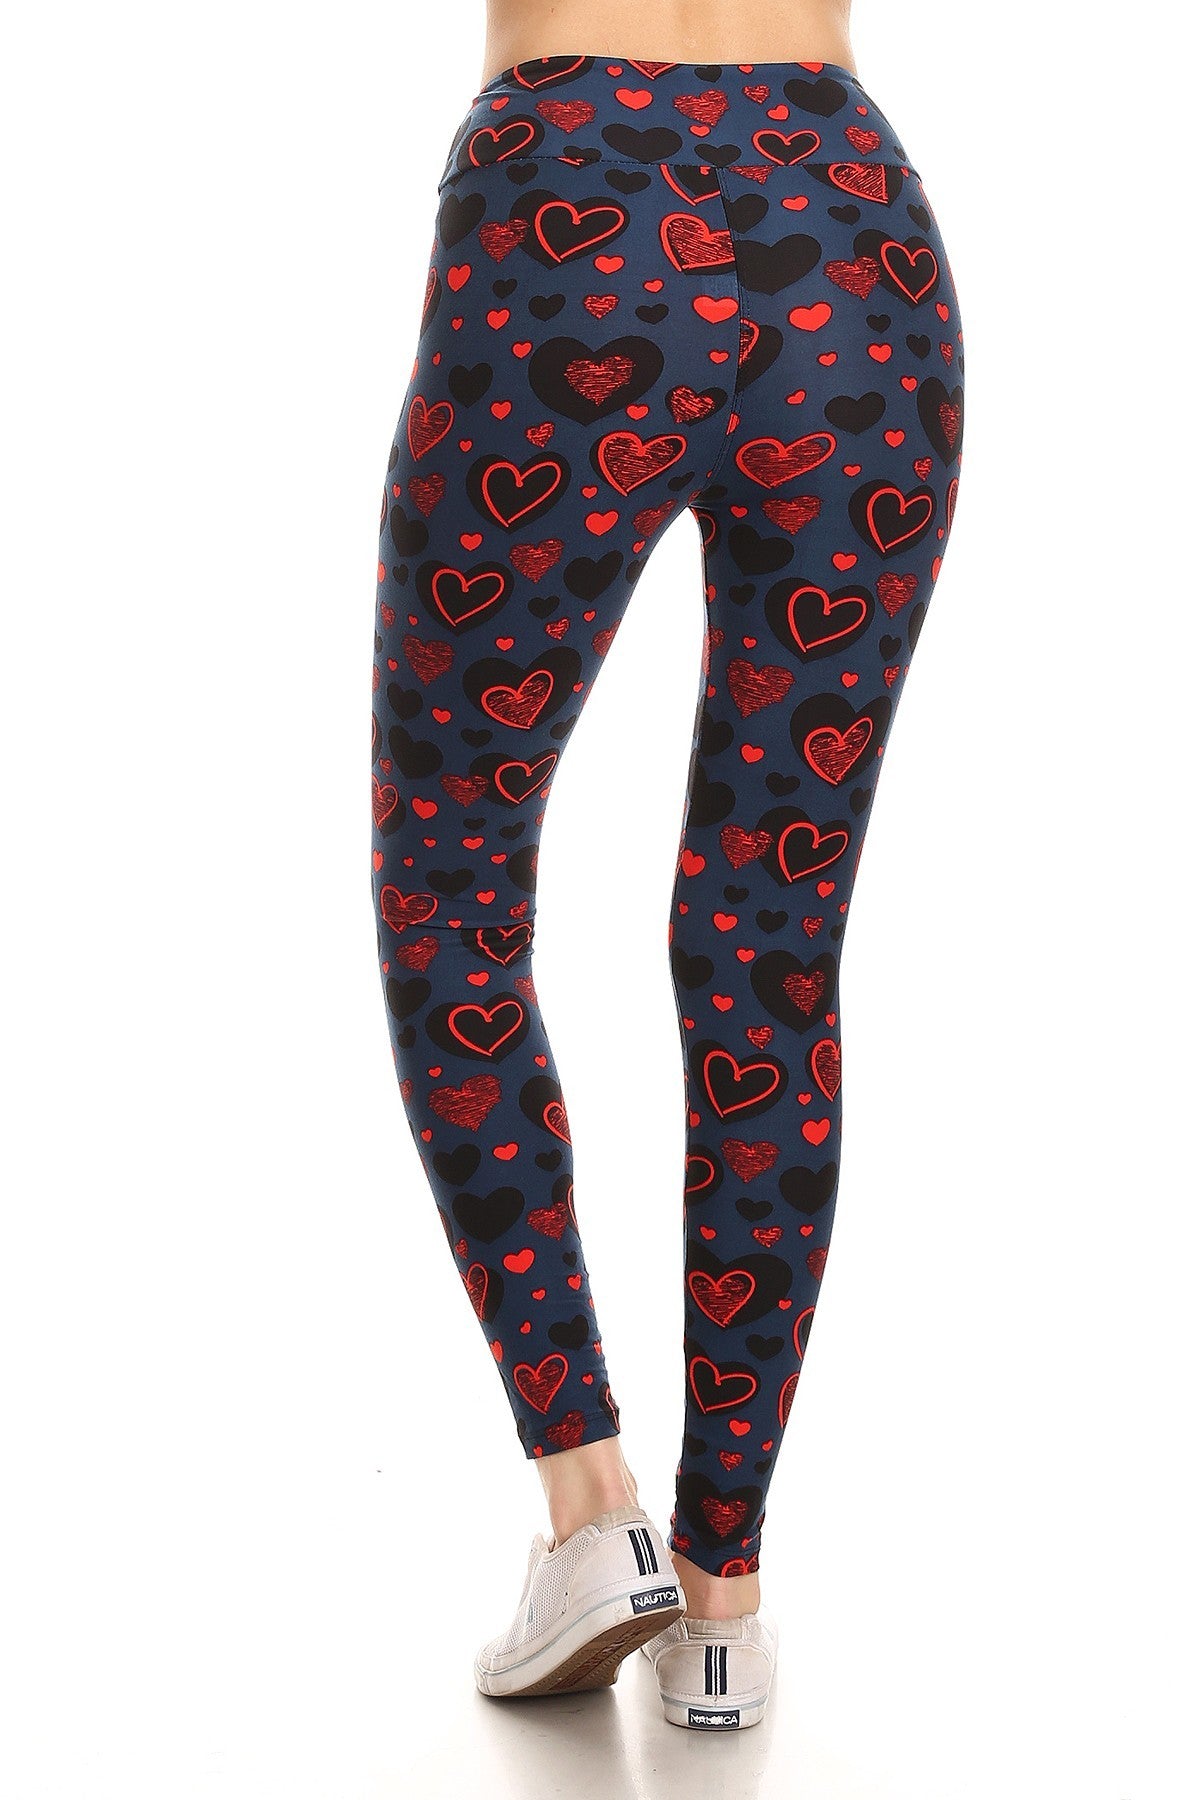 Yoga Style Banded Lined Heart Print, Full Length Leggings In A Slim Fitting Style With A Banded High Waist - Tigbul's Fashion